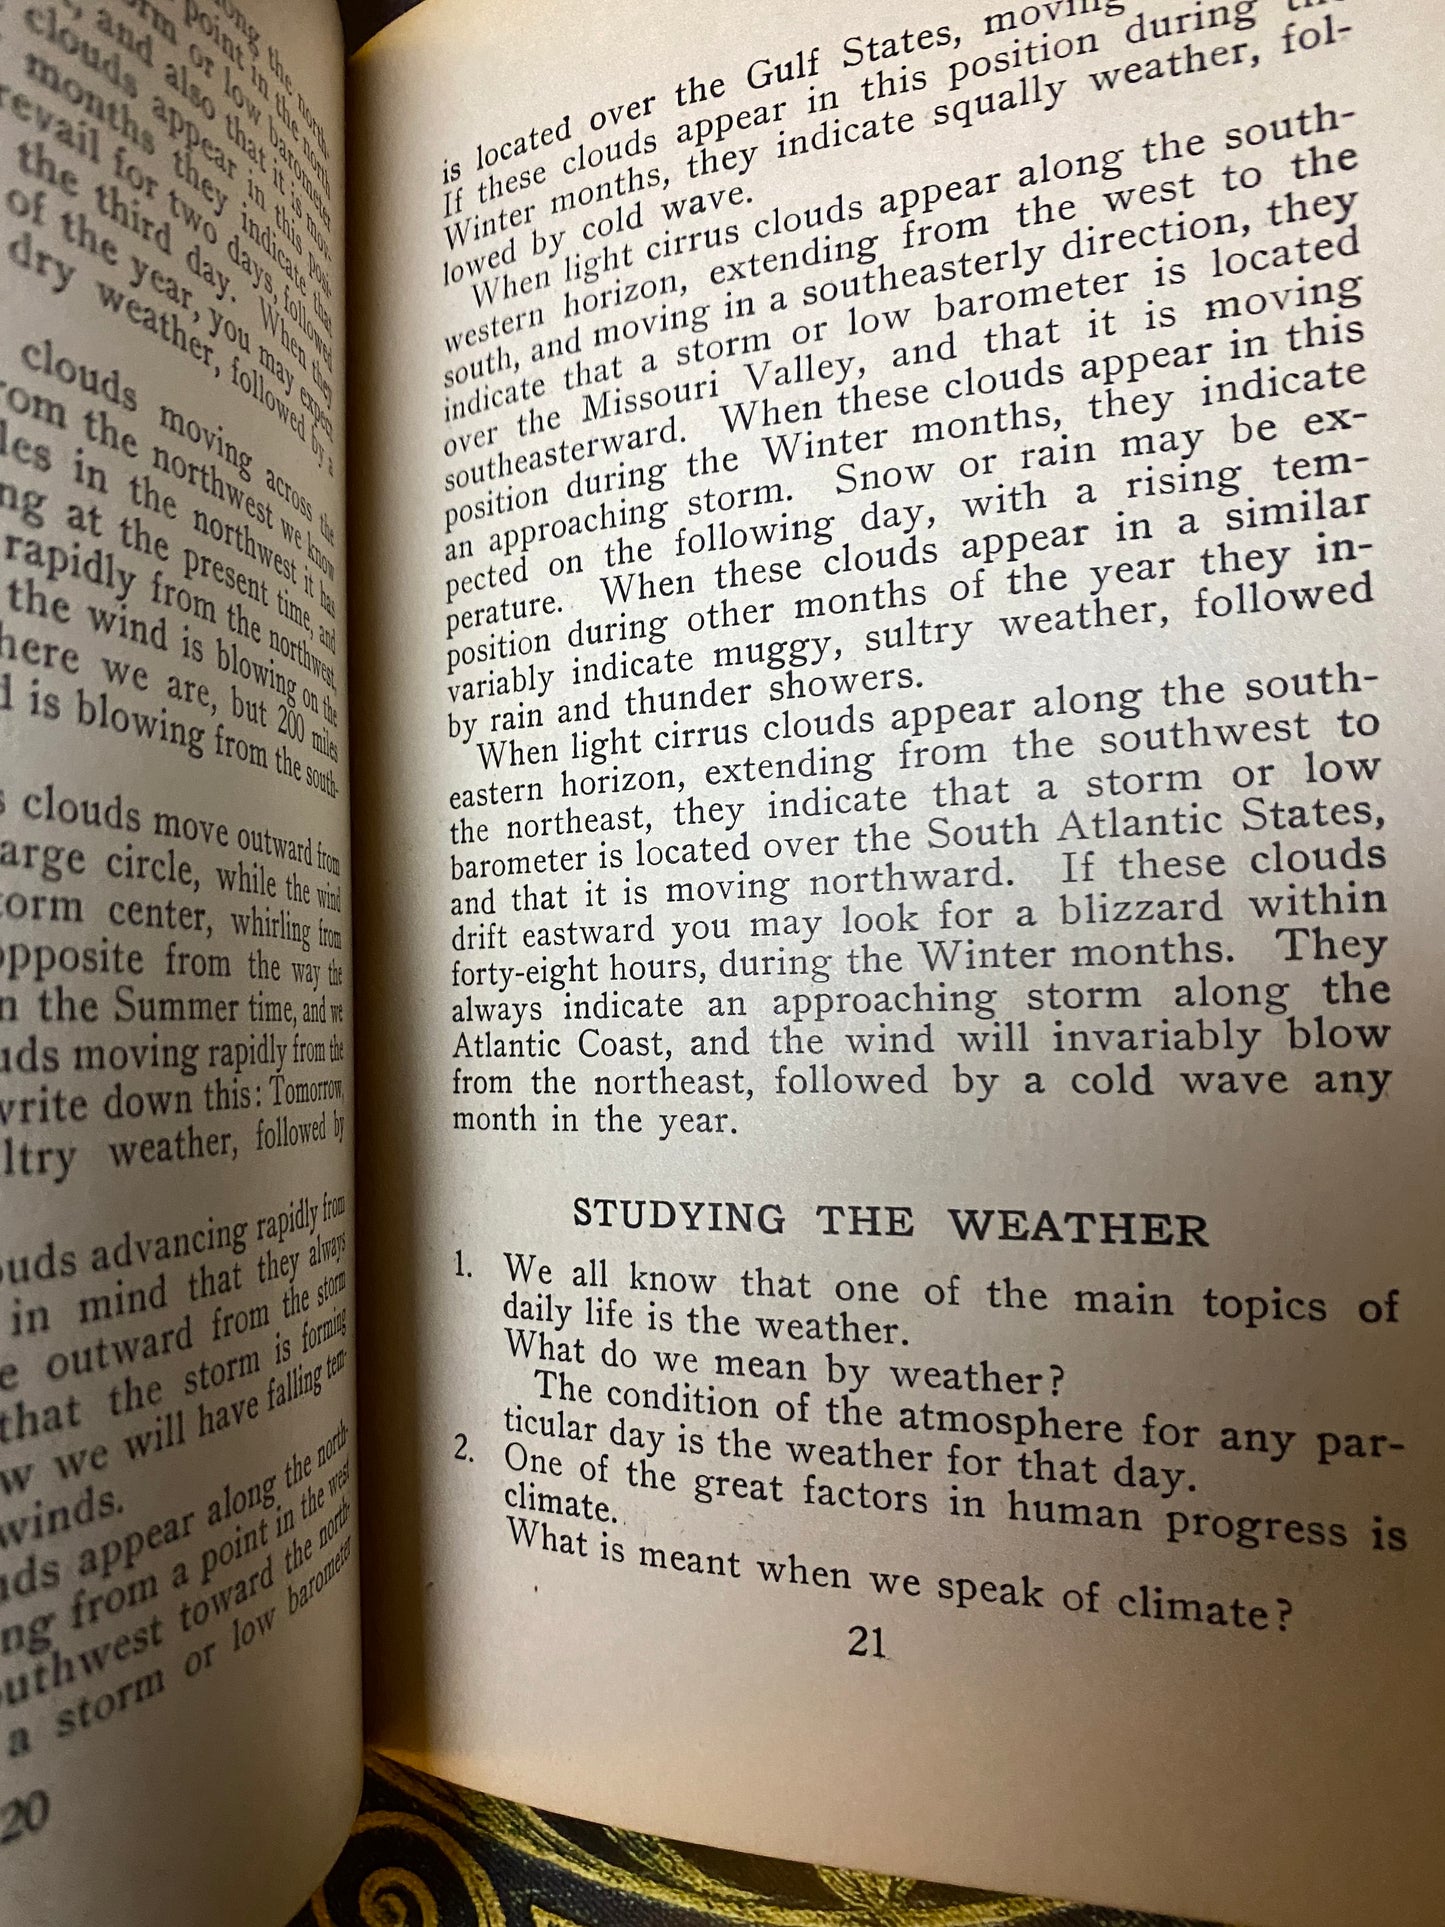 Weather Changes Revealed by A.J. De Voe, 1924 (First Edition)